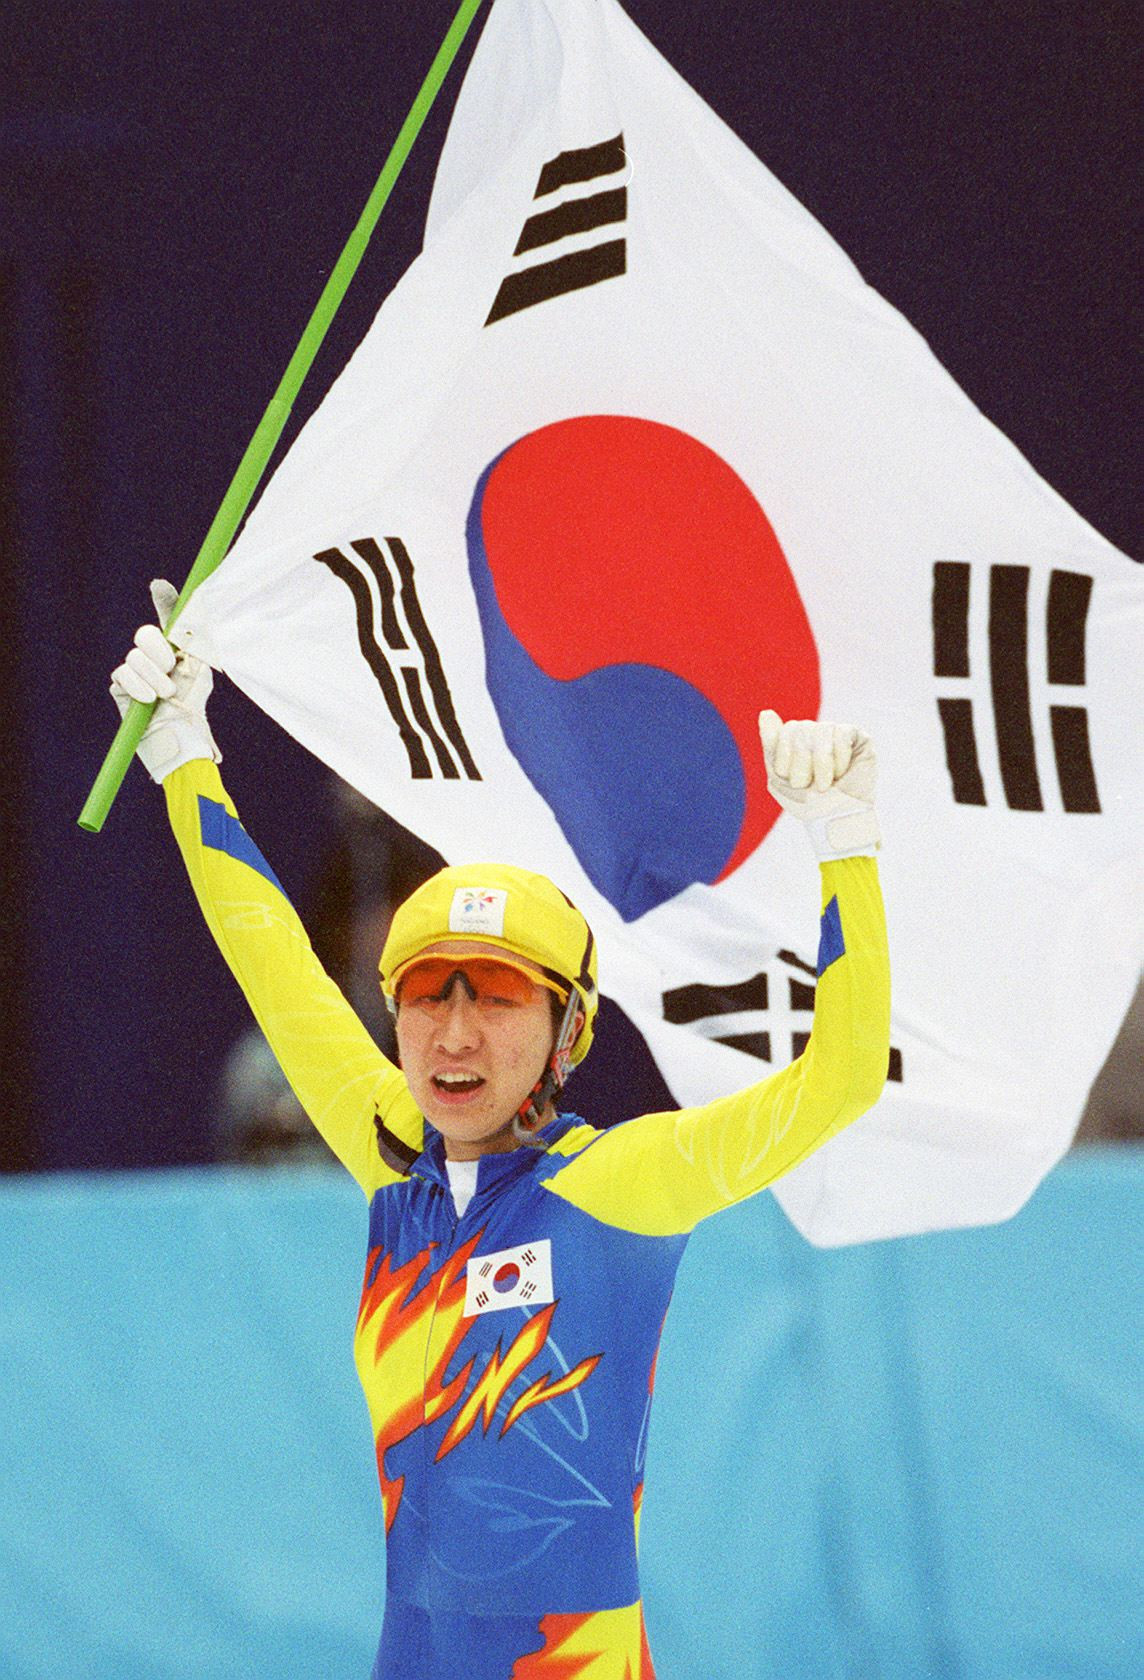 Chun Lee-kyung is among top South Korean short track speed skaters Jun Myung-kyu has helped reach the top ©Getty Images